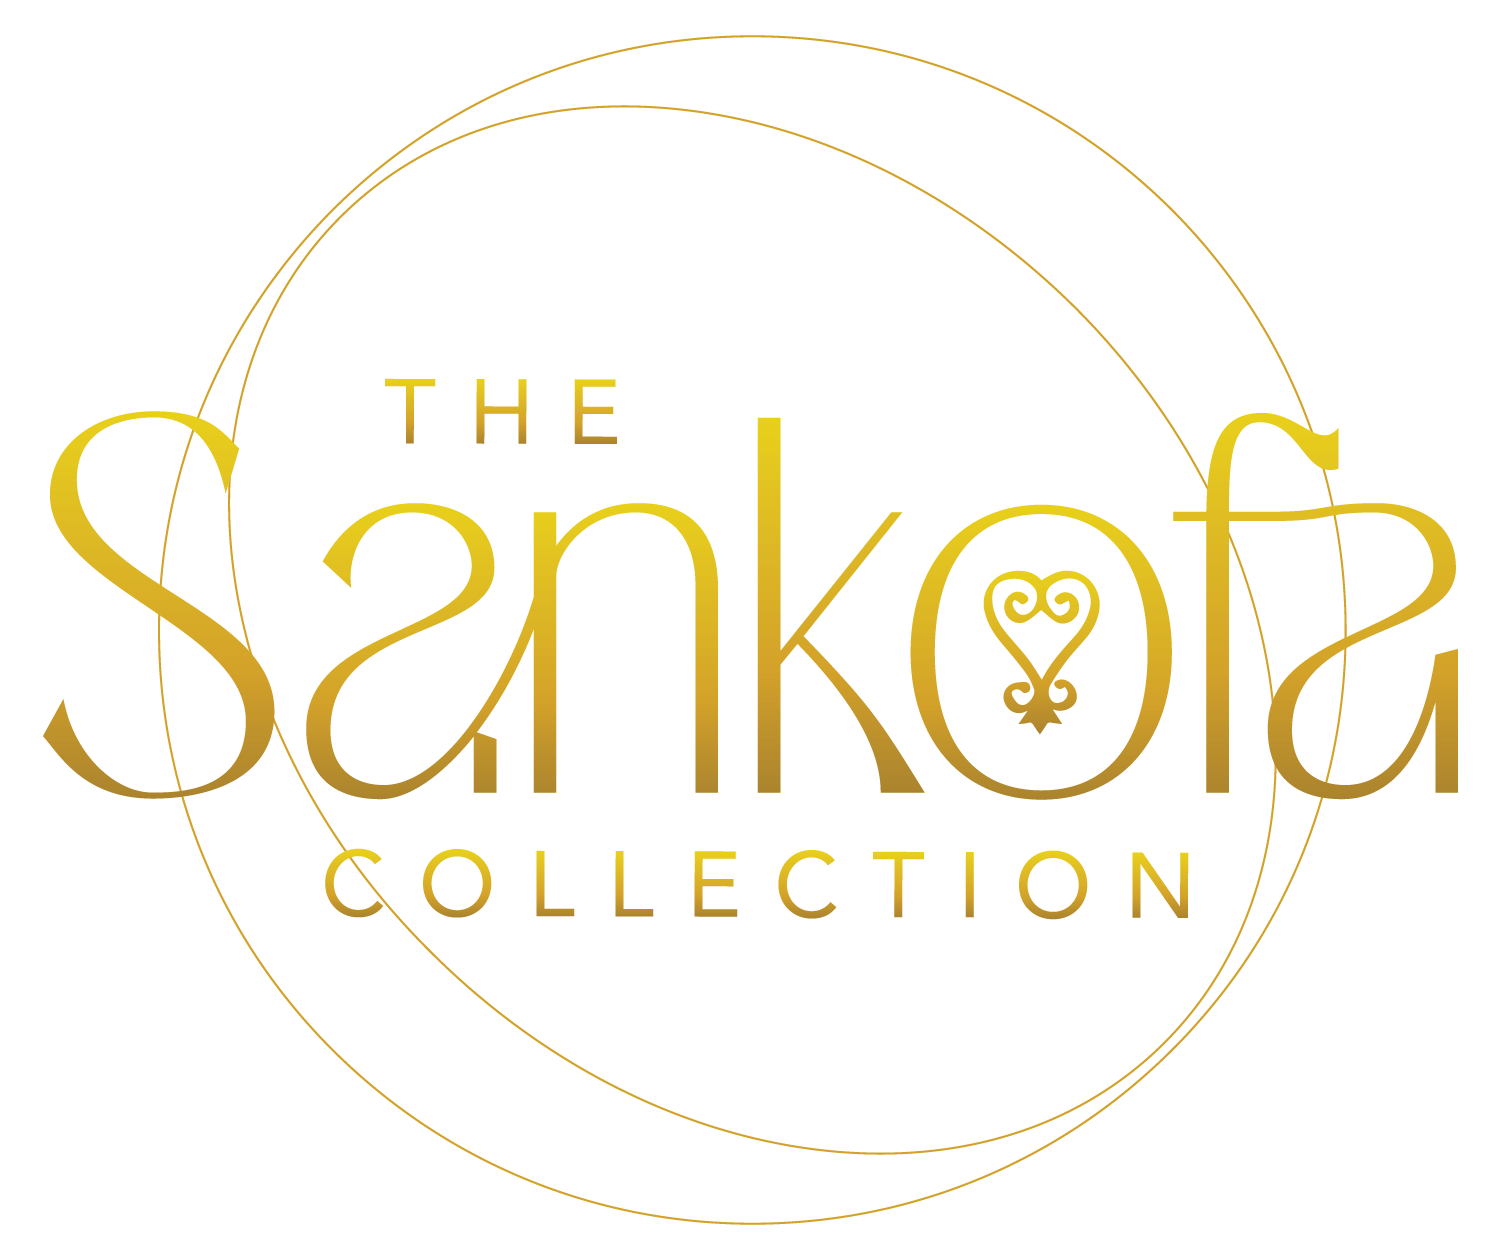 The Sankofa Collection